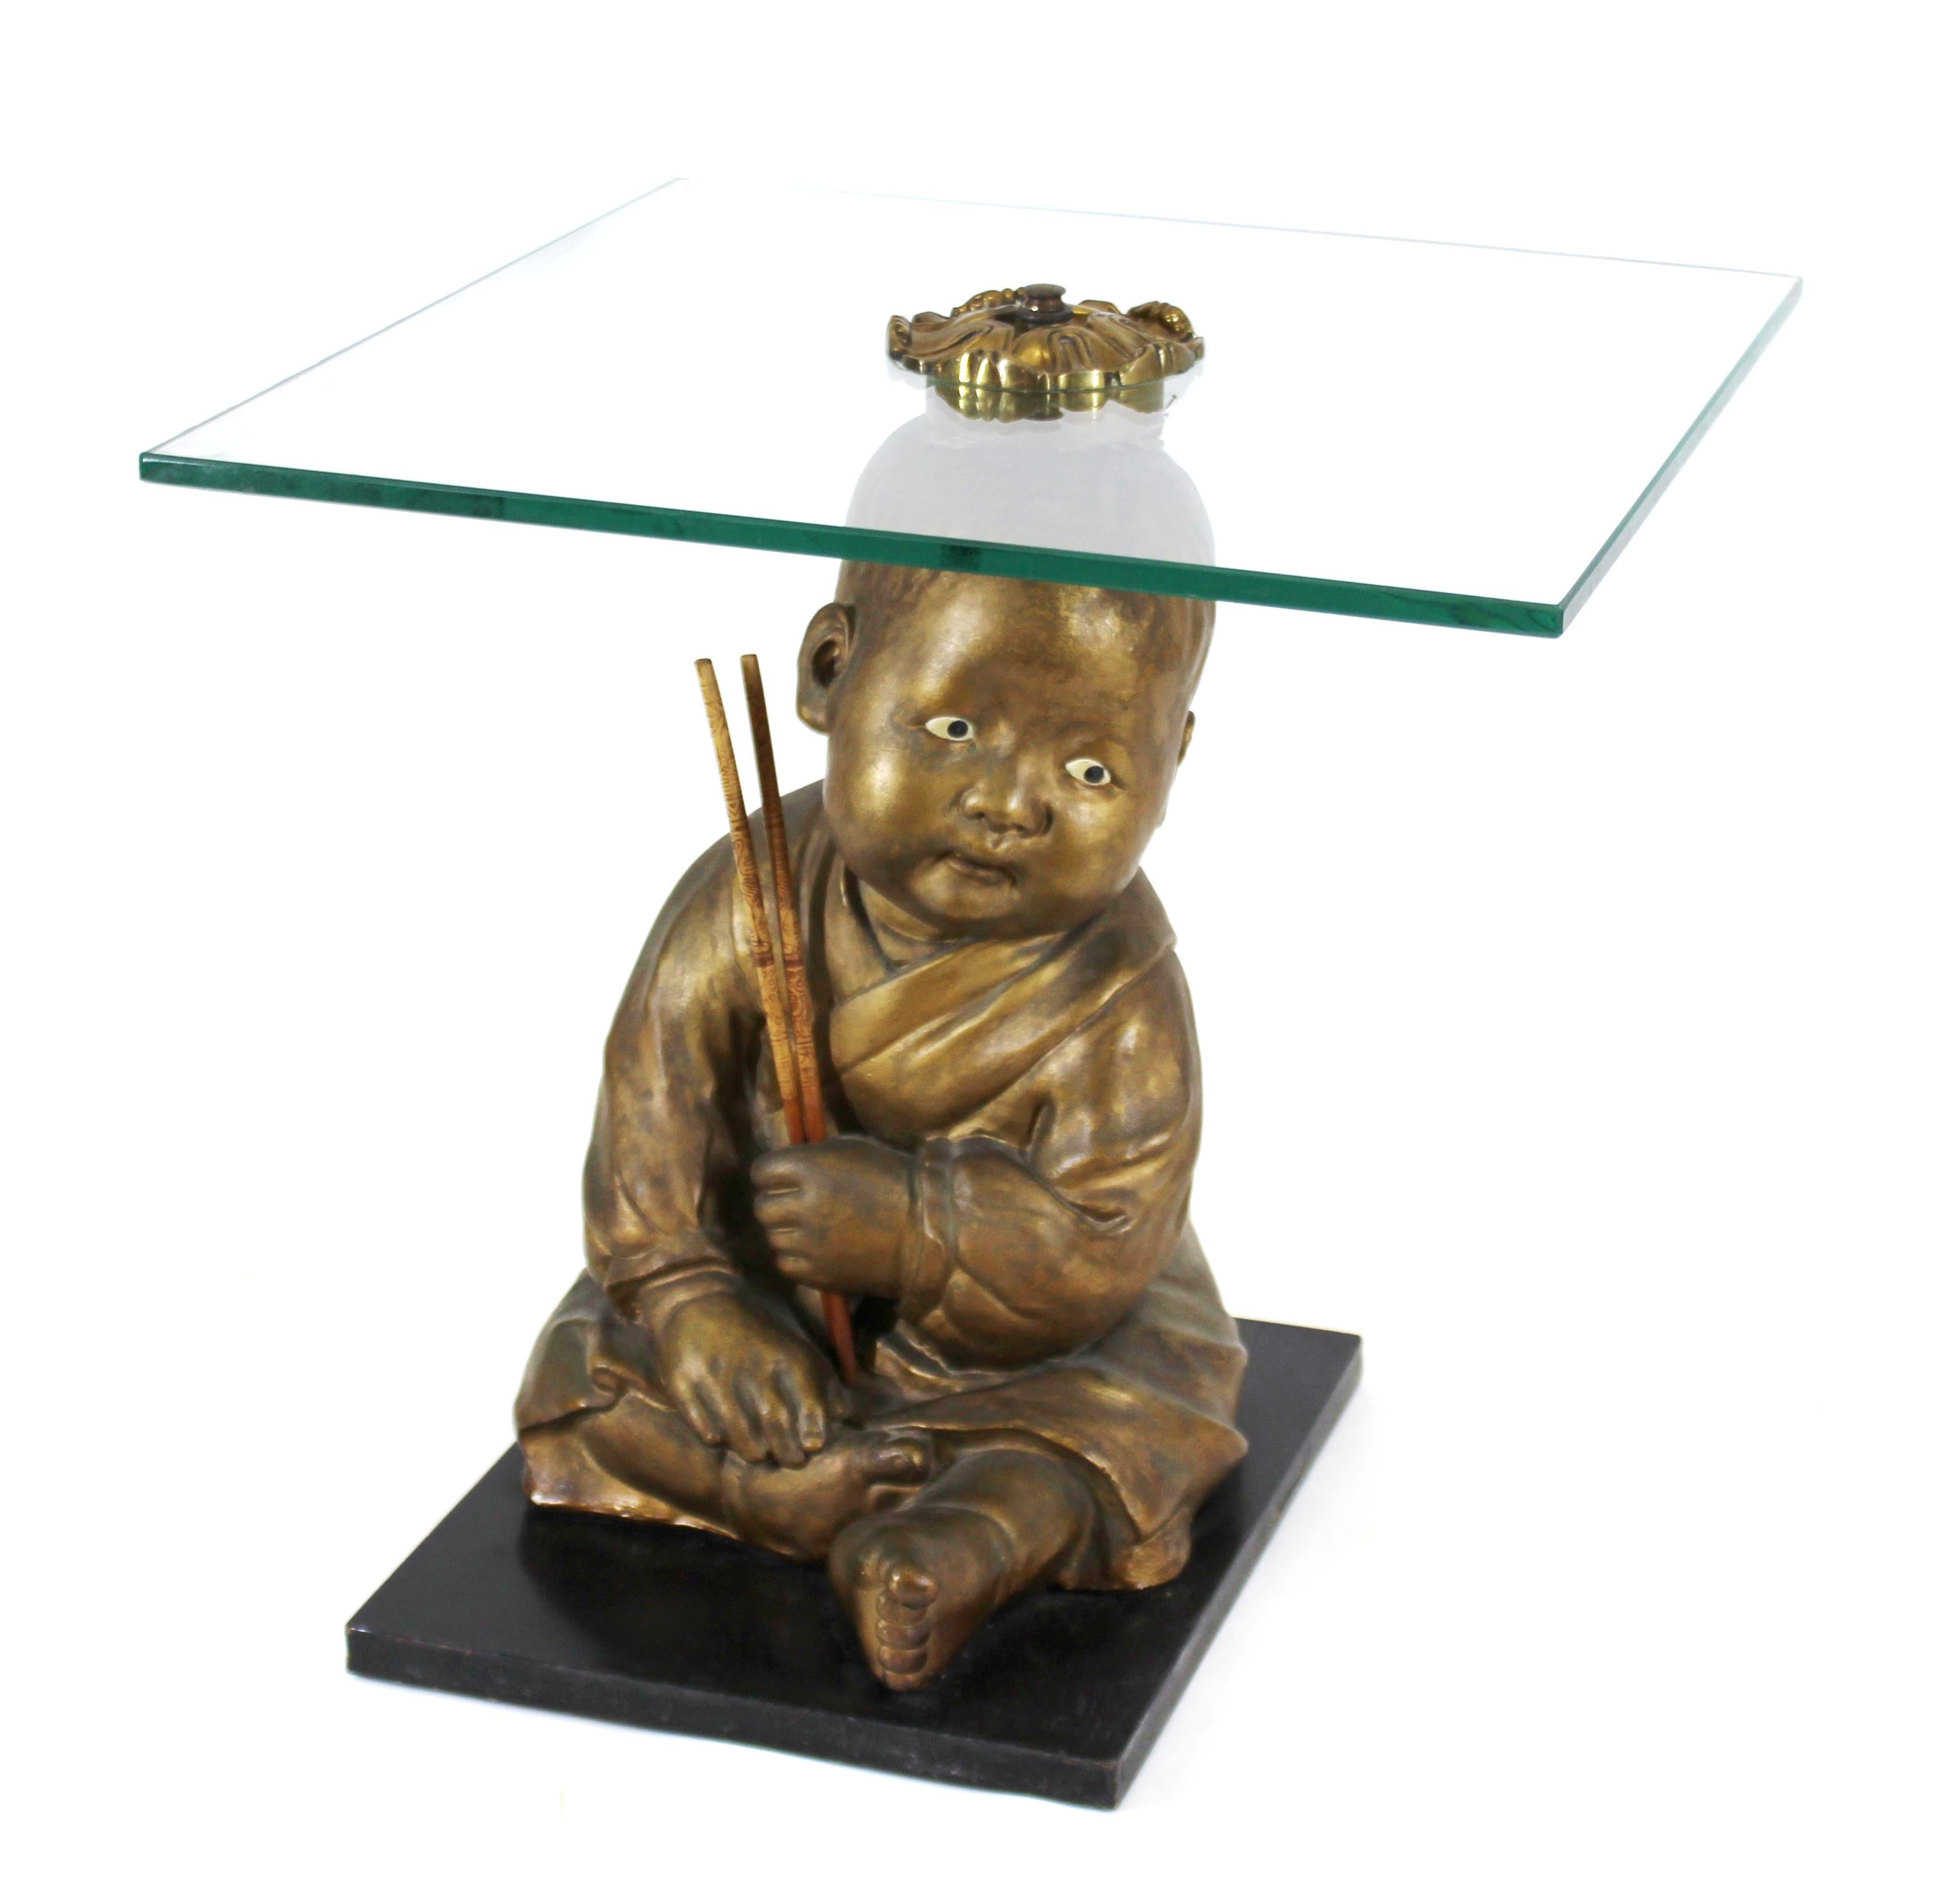 American chalk ware figures depicting gold painted seated Asian infants holding chopsticks, turned into a pair of side tables with square cut glass tops.